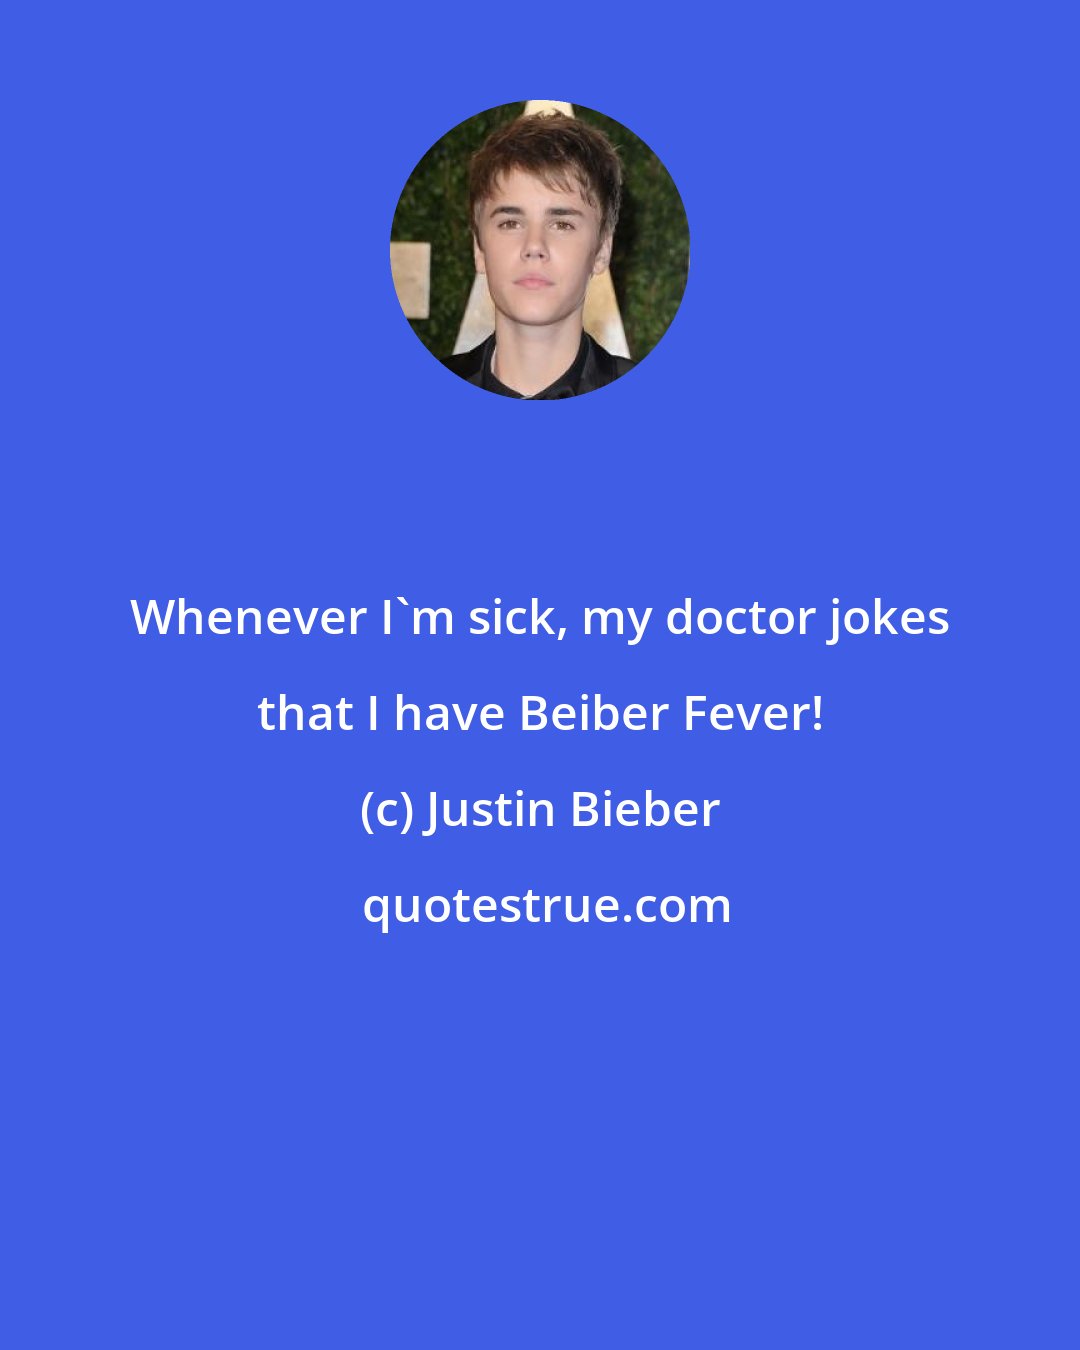 Justin Bieber: Whenever I'm sick, my doctor jokes that I have Beiber Fever!